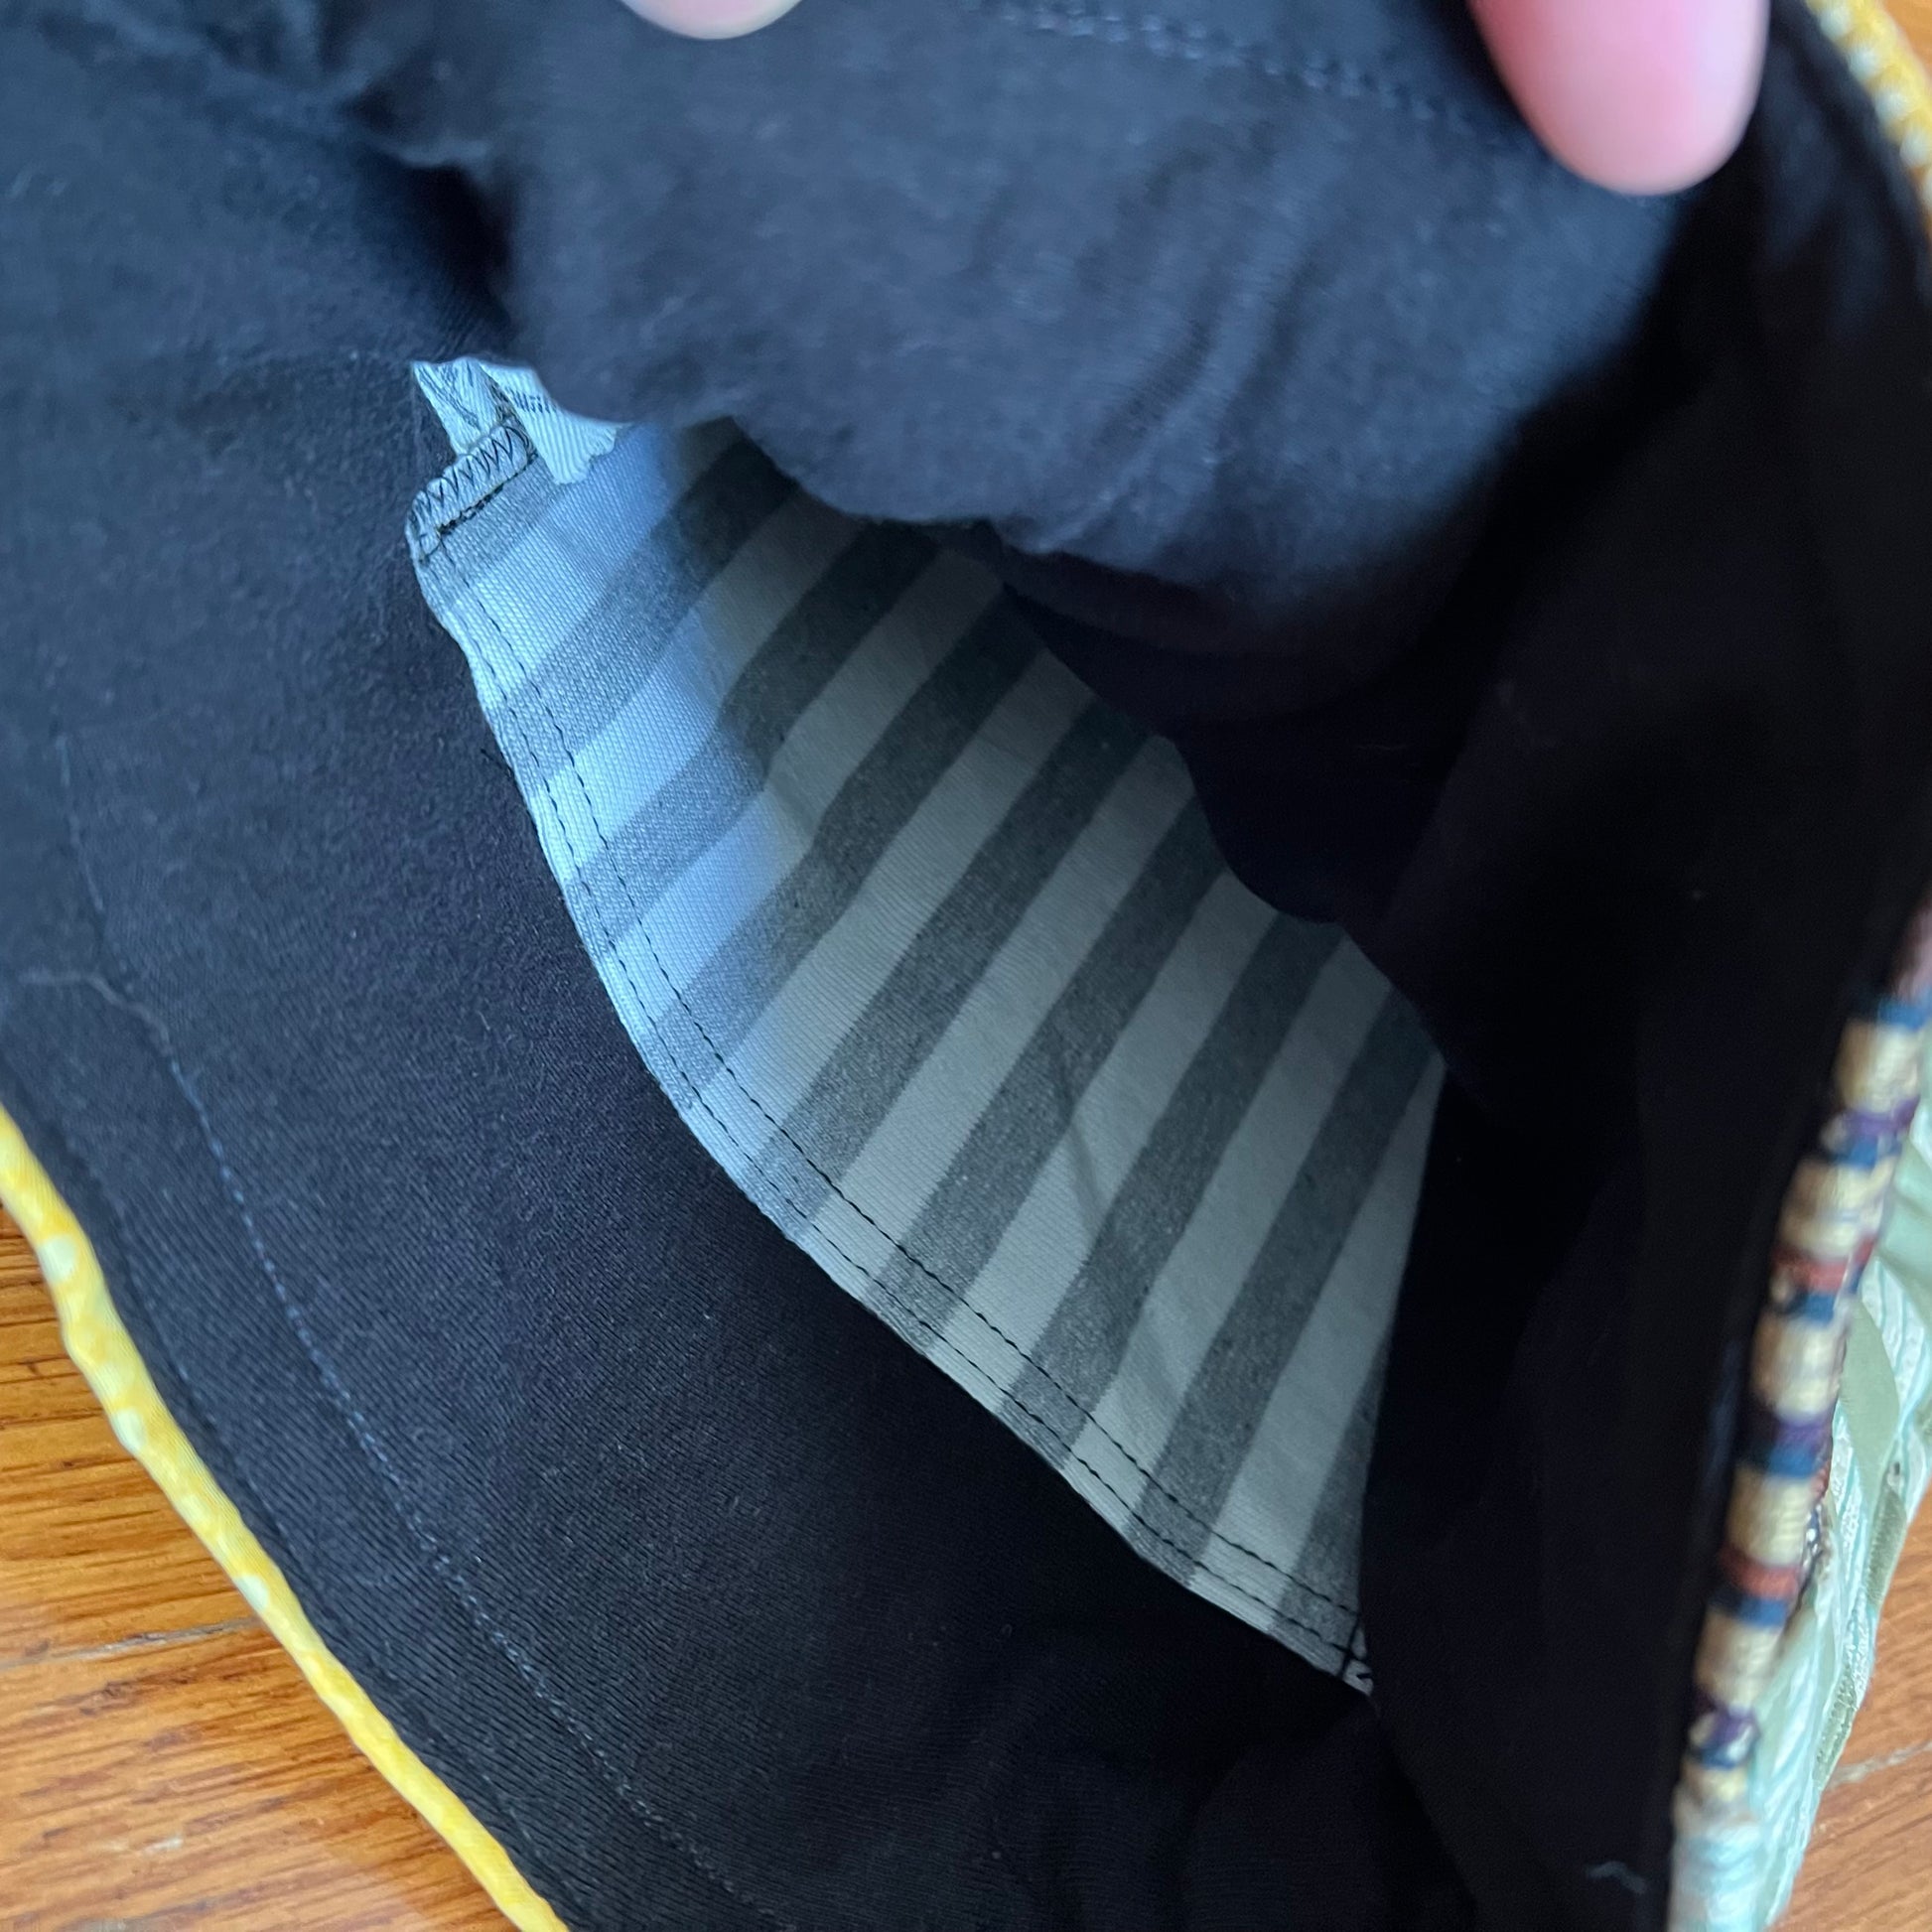 Inside of tote bag, showing a soft tshirt interior with a striped pocket. Panic in Polkadots label.